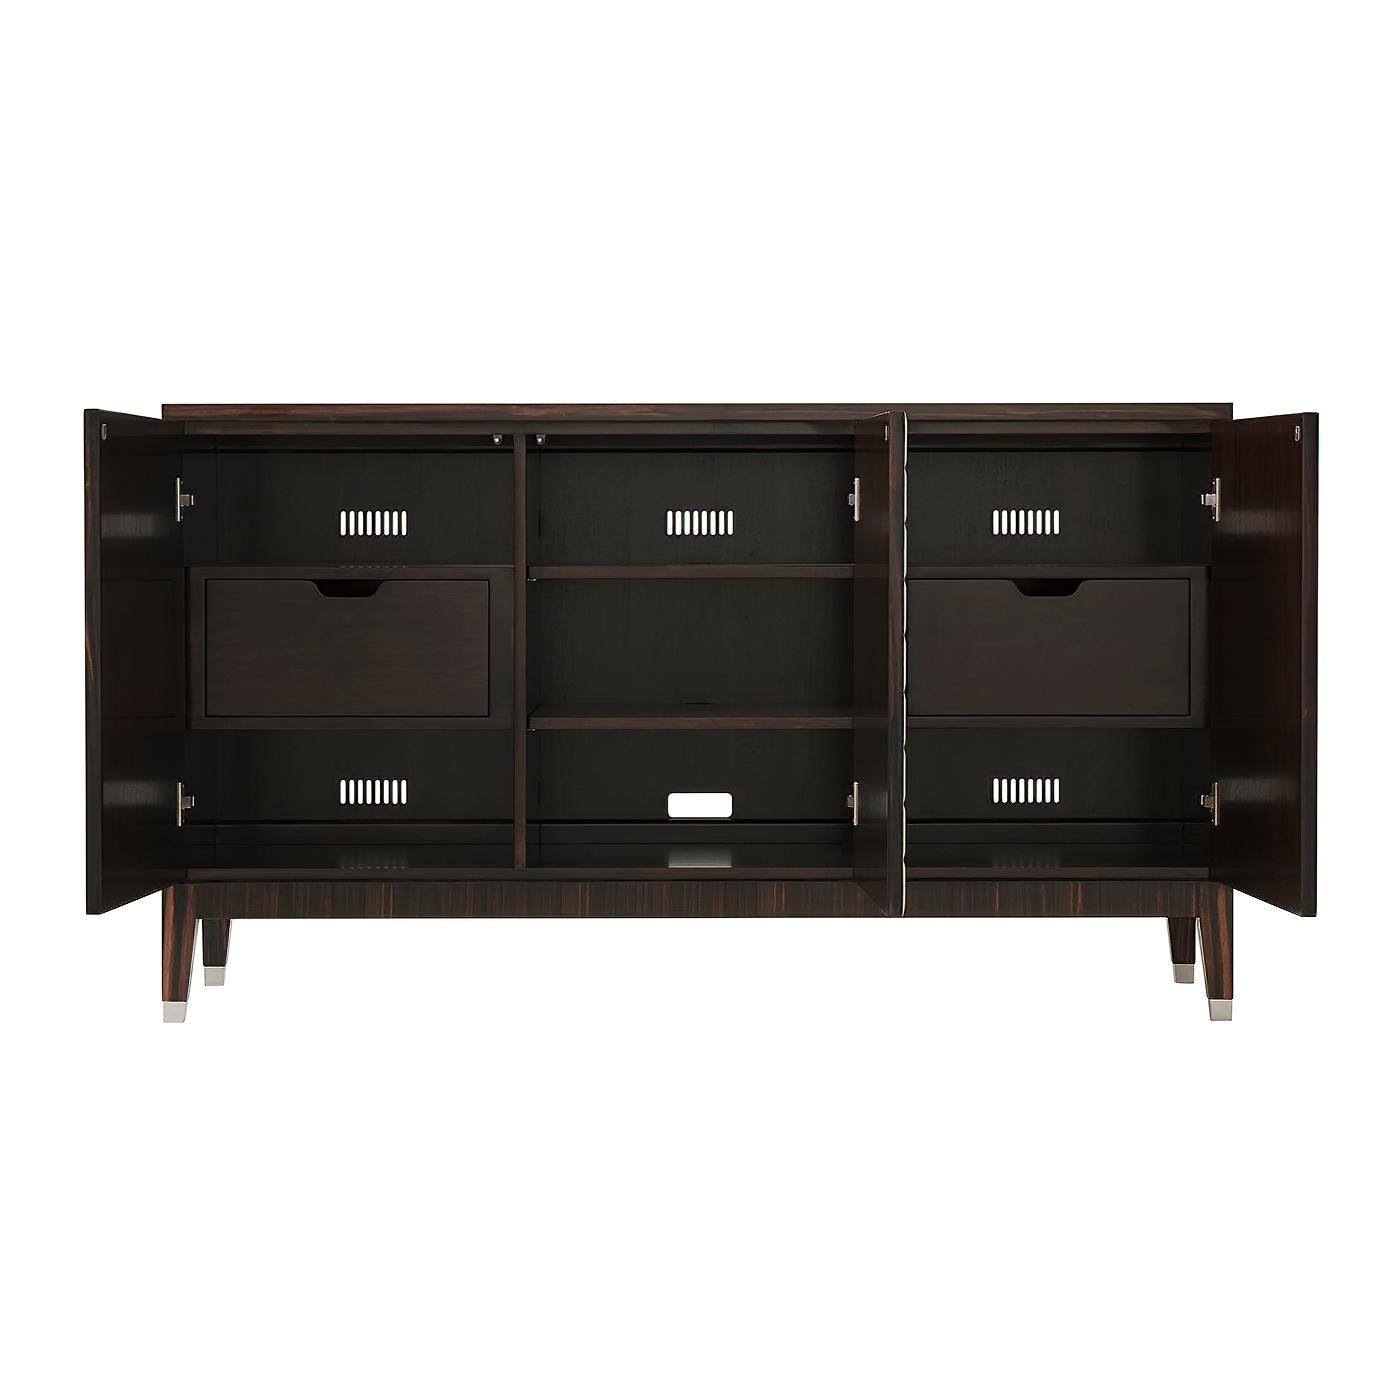 An Art Deco-inspired sideboard with exotic veneered top and sides with lacquered cast composite relief paneled doors, the three-section interior with adjustable shelves and drawers on square tapered legs with polished nickel finish